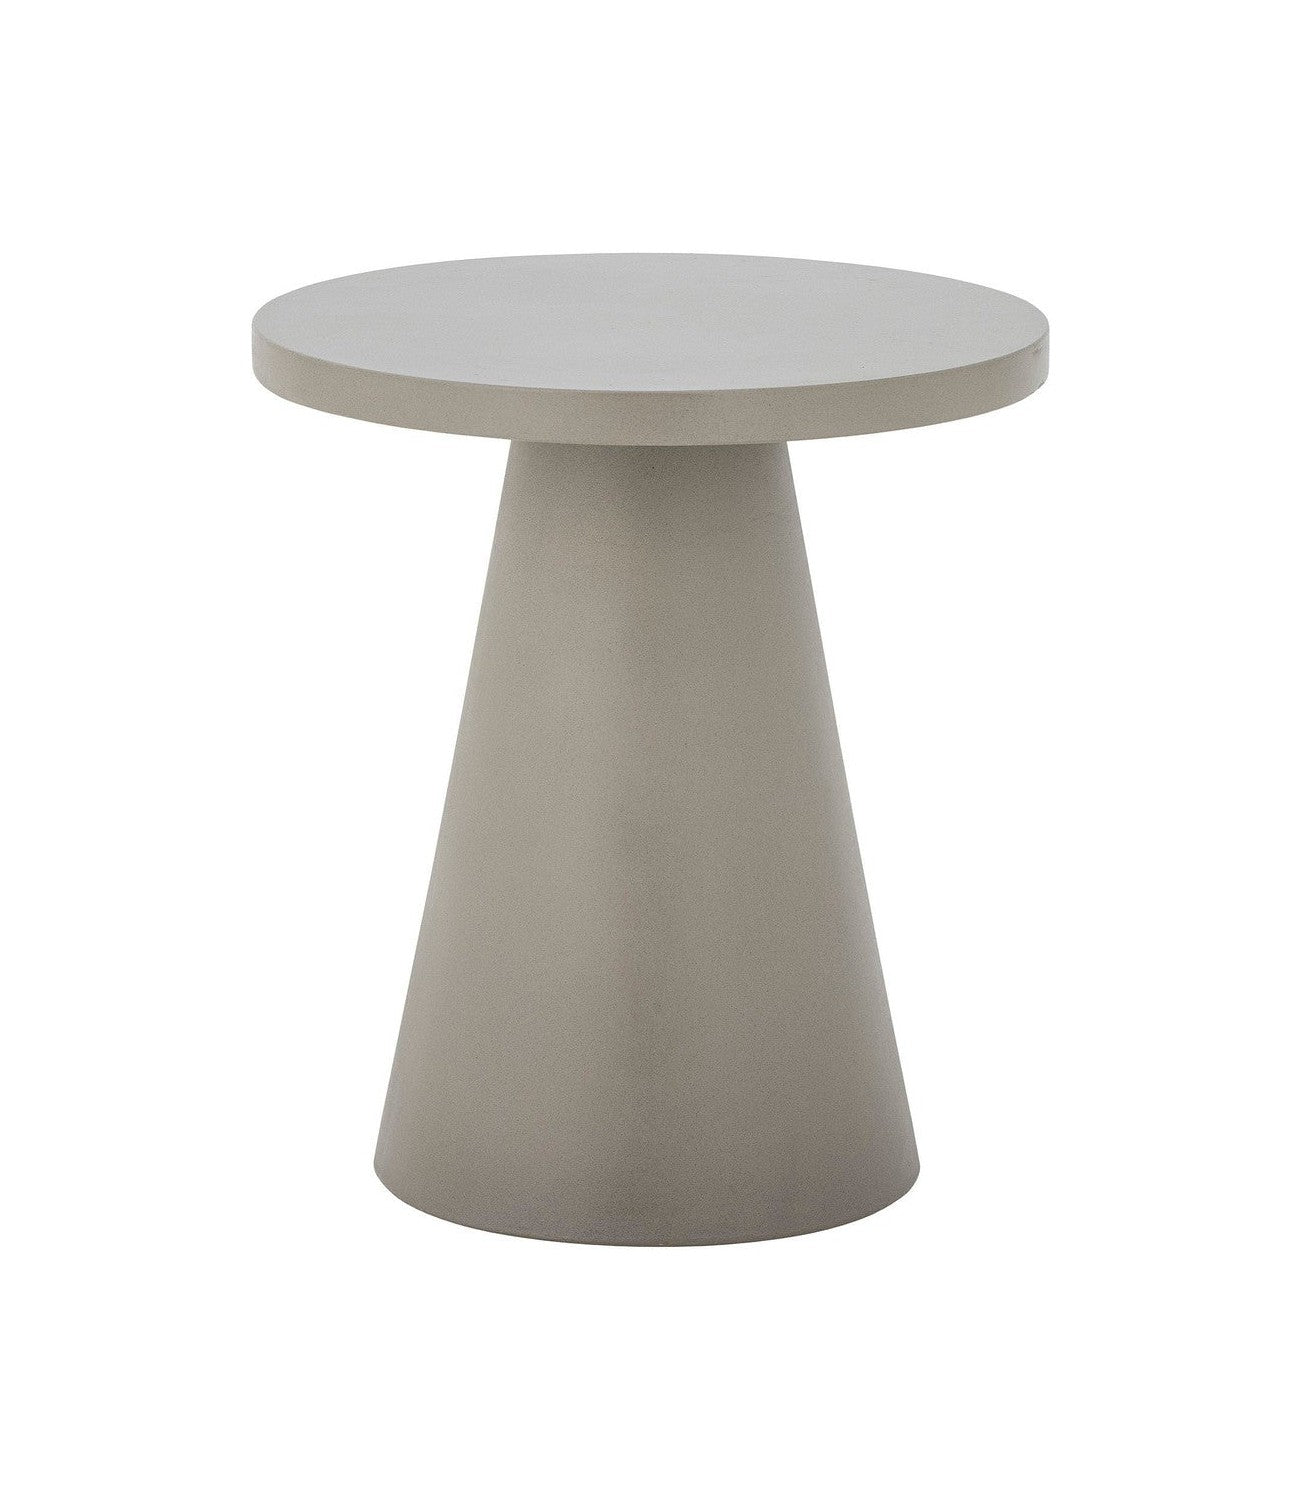 Bloomingville Ray Side Table, Grey, Fiber cement